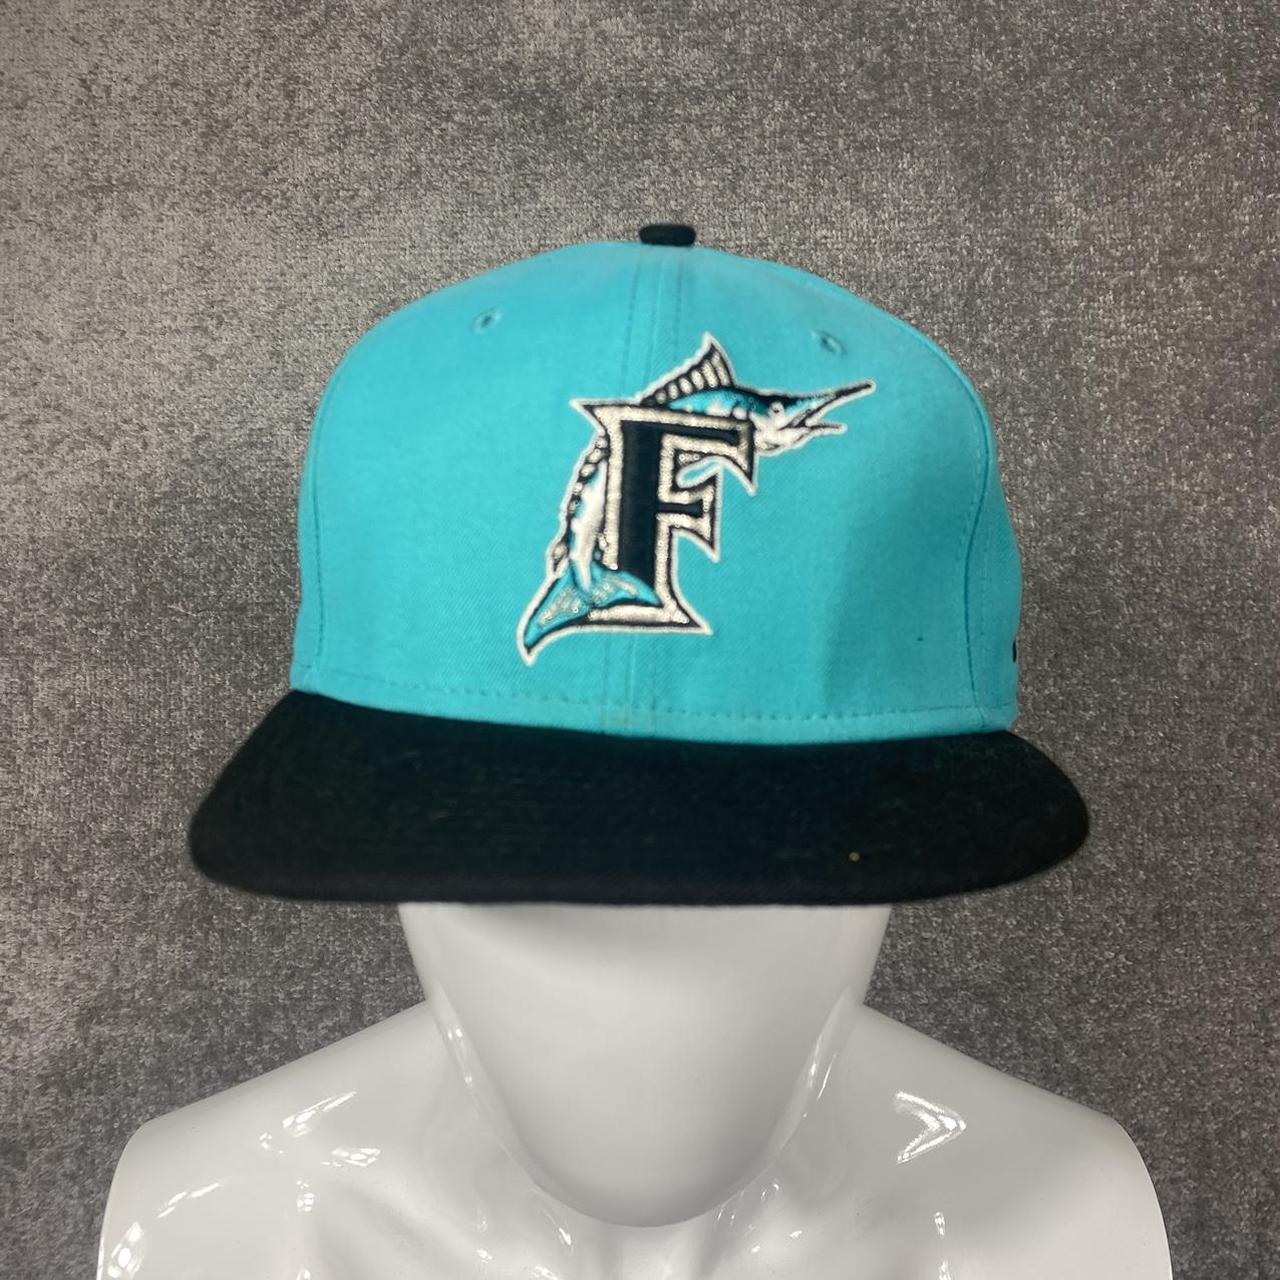 Florida Marlins Fitted 7 1/4 New Era Pro Model Wool Hat